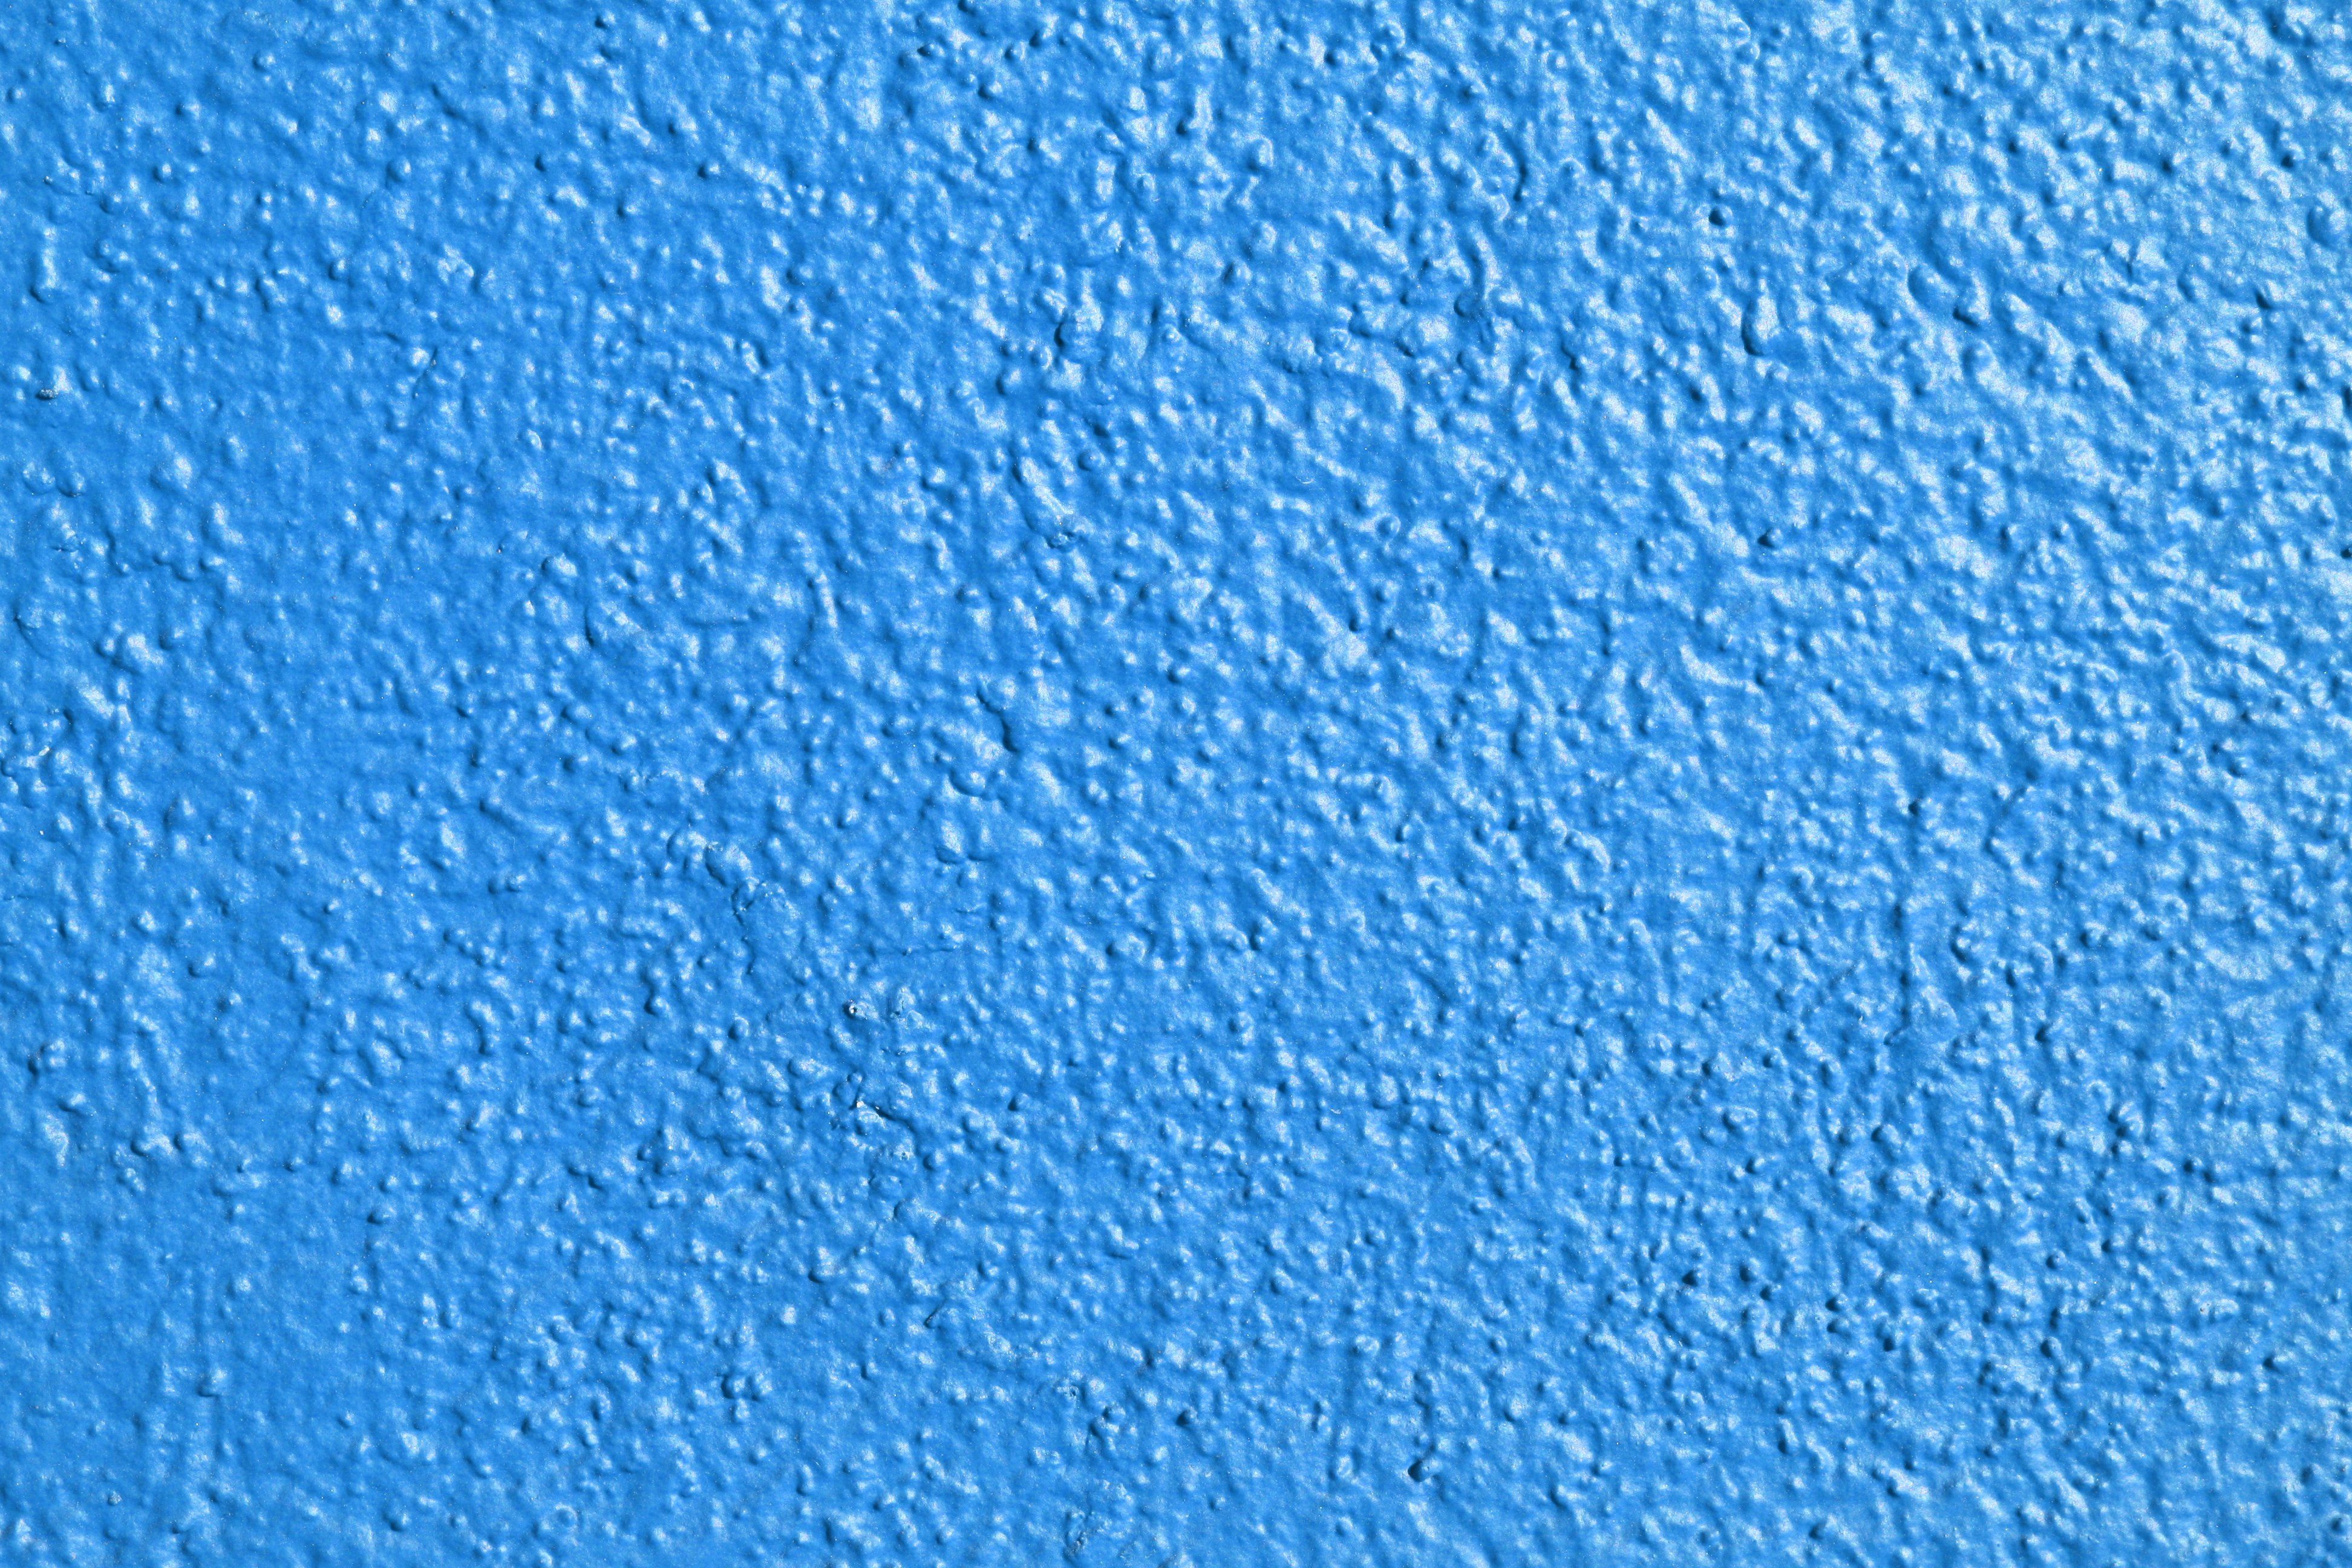 Sky Blue Painted Wall Texture Picture. Free Photograph. Photo